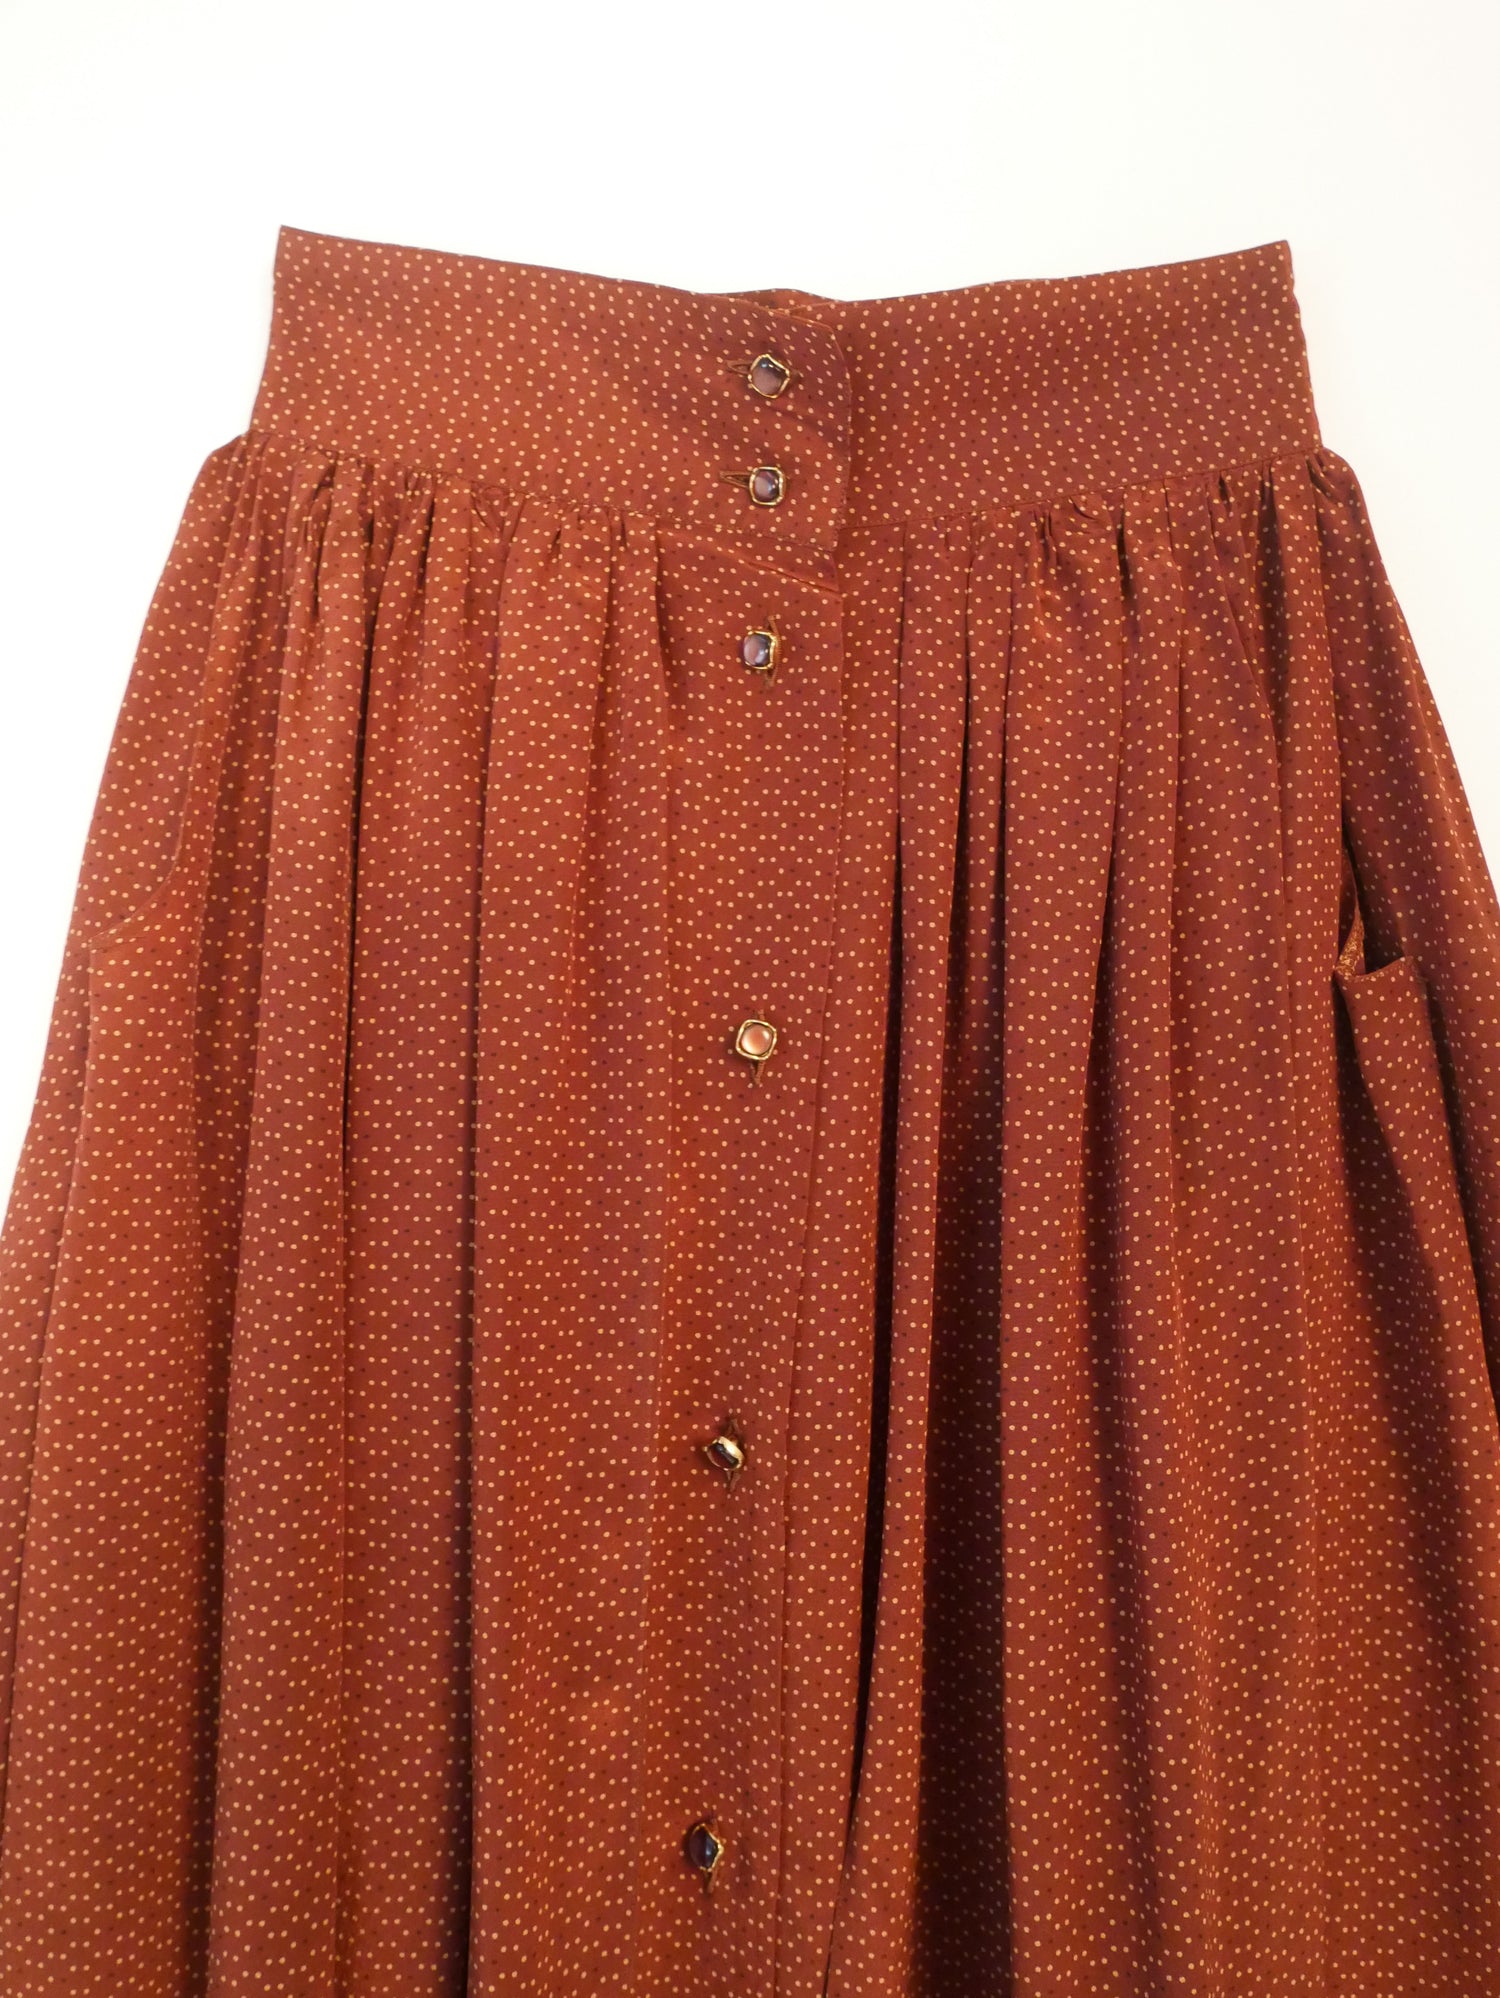 CACHAREL Skirts vintage Lysis Paris pre-owned secondhand